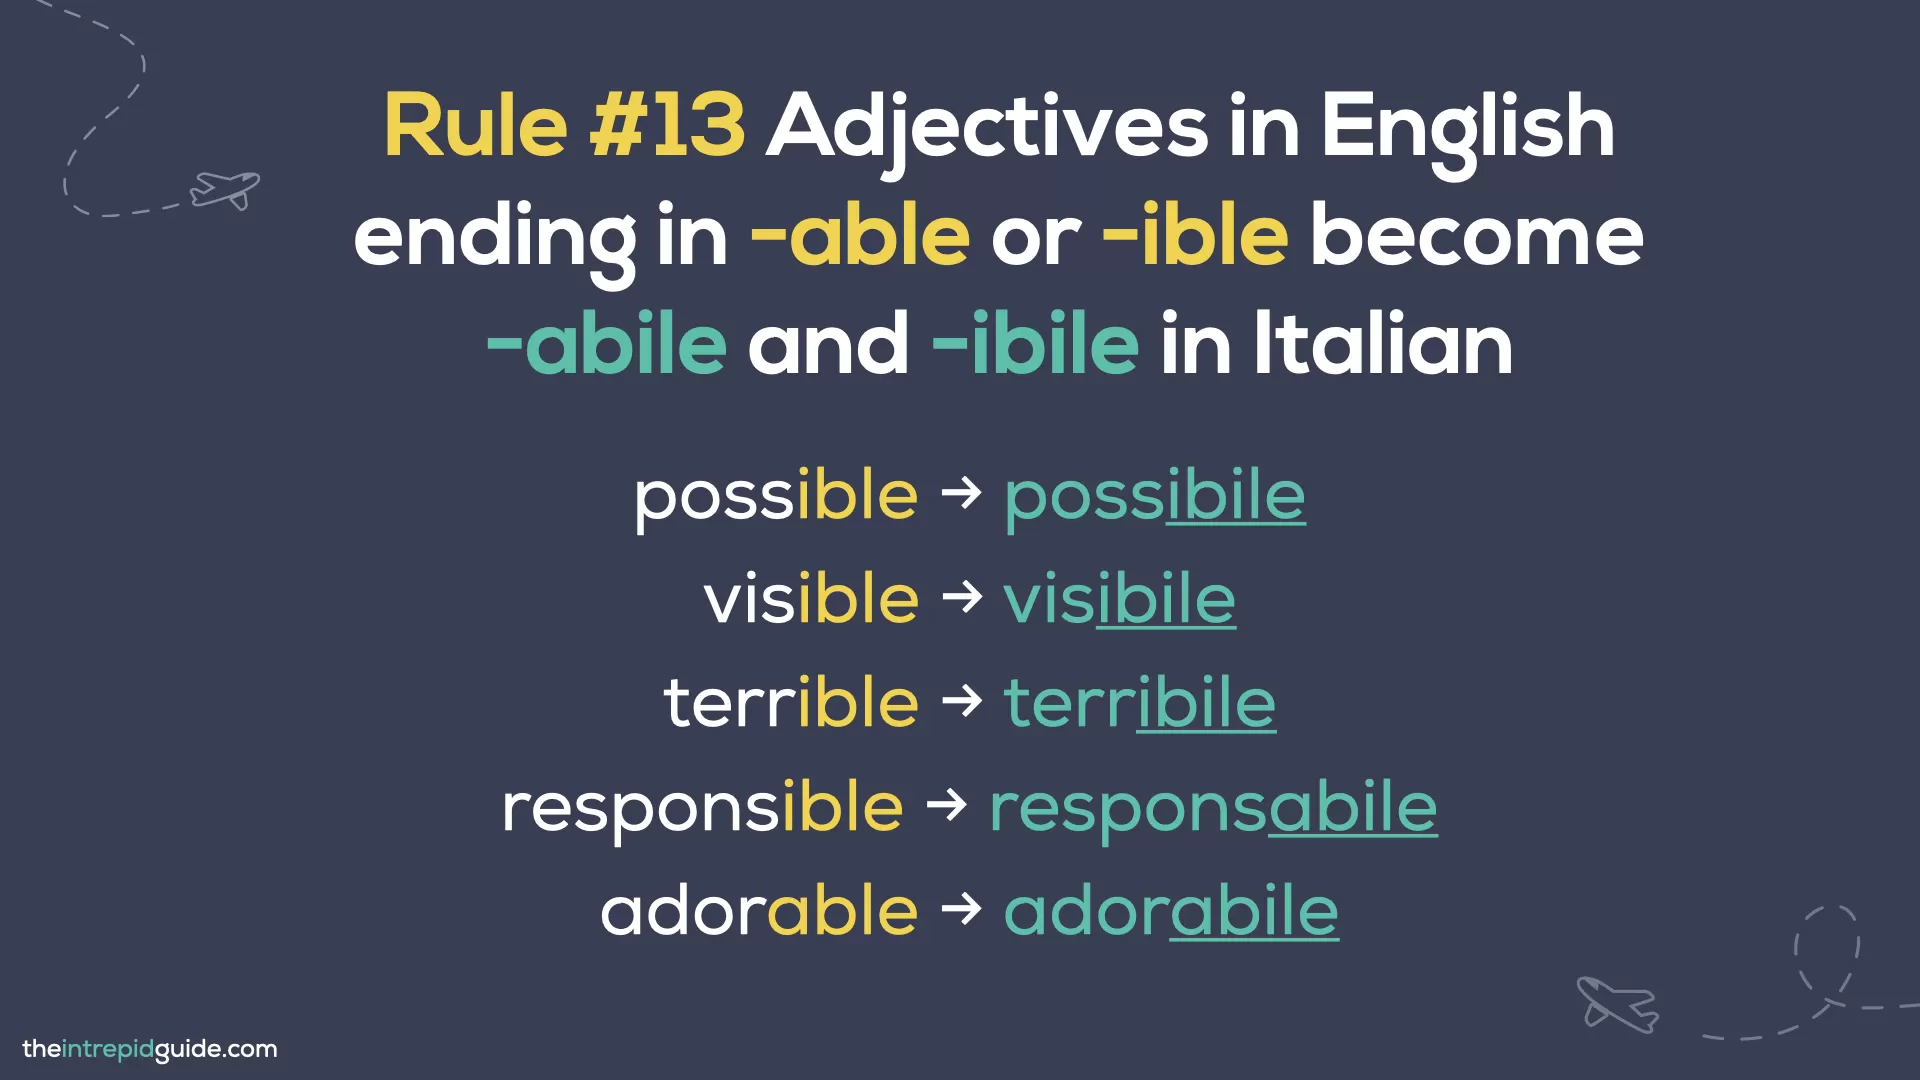 Italian cognates and loan words - Rule 13 - Adjectives in English ending in -able or -ible become -abile and -ibile in Italian